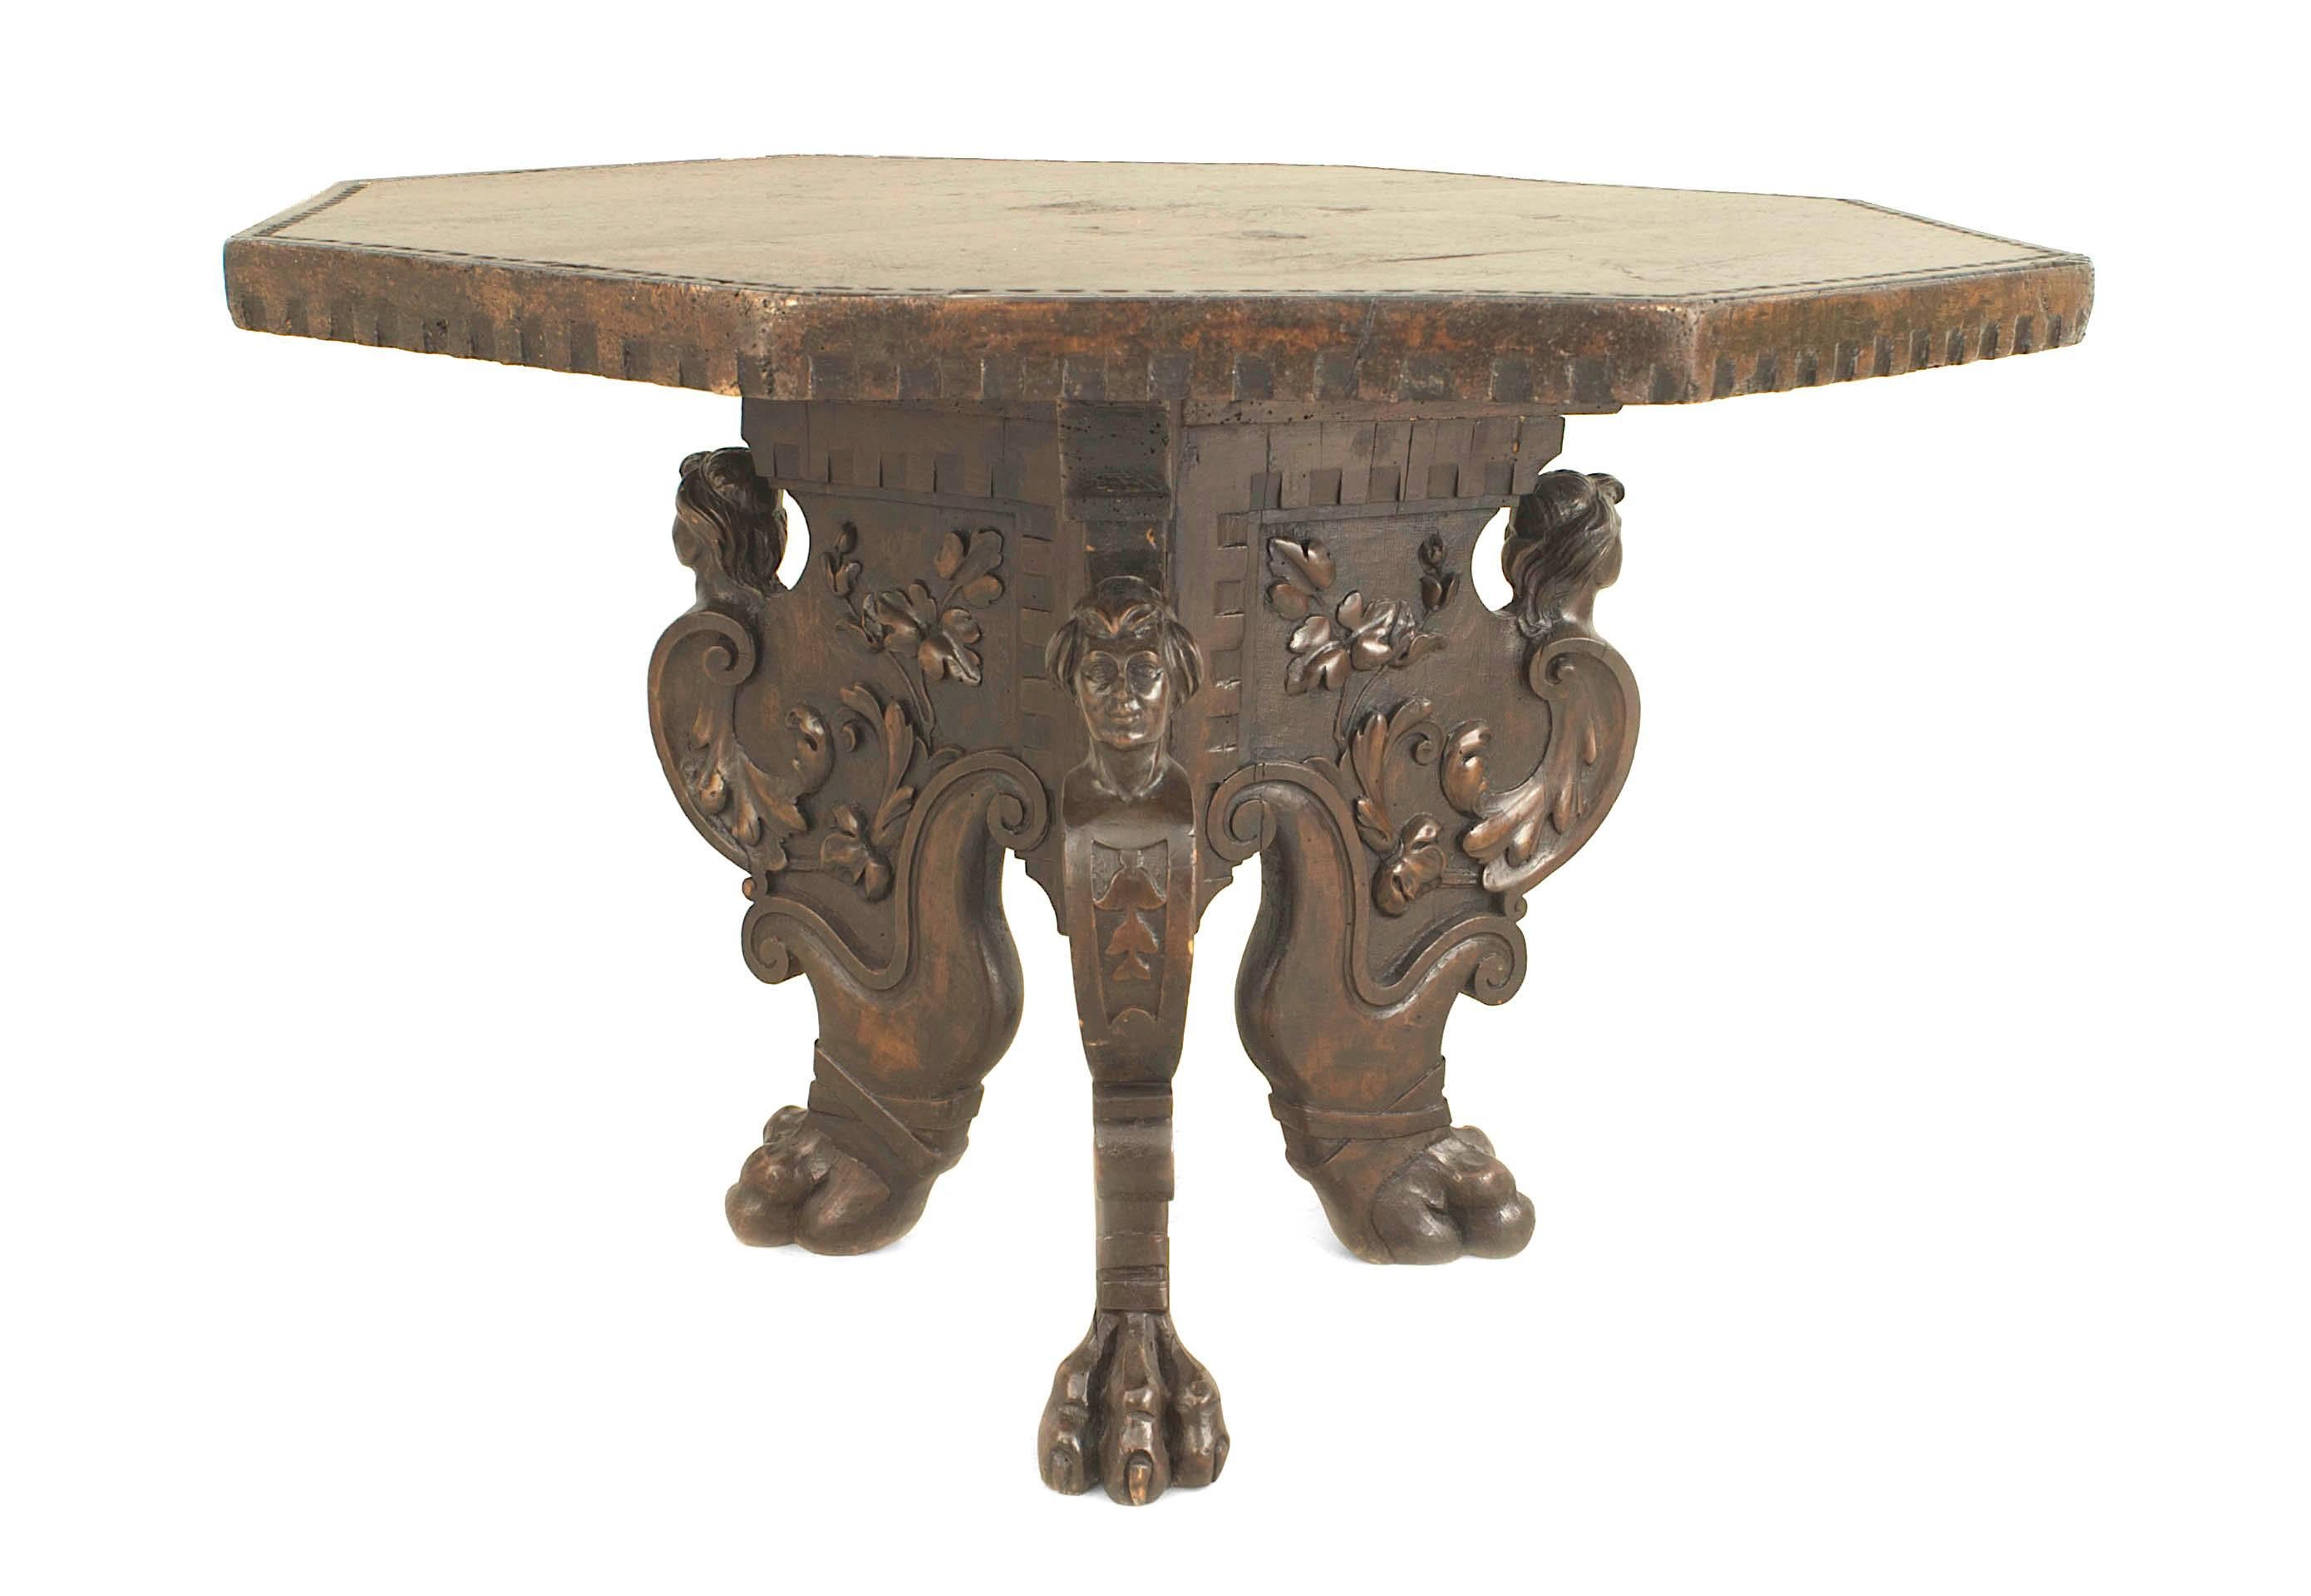 Italian Renaissance Revival (19th Century) walnut octagonal top center table with a carved edge and supported on a carved tripartite base with claw feet.
